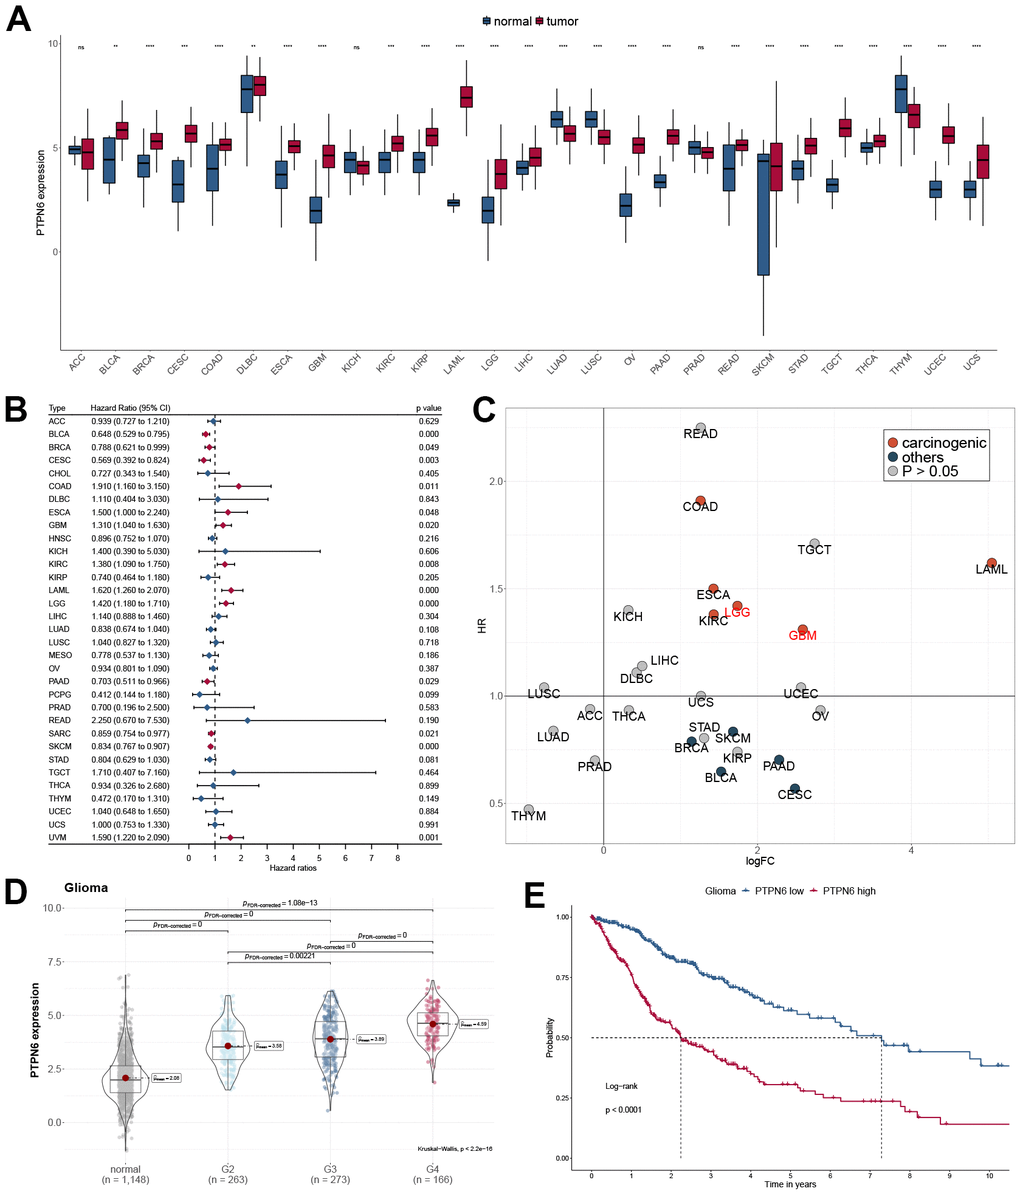 Oncogenic properties of PTPN6 across pan-cancer. (A) The gene expression of PTPN6 in cancer compared with normal tissues (B) Clinical significance of PTPN6 for overall survival in the TCGA dataset. (C) Underlying carcinogenesis of PTPN6 in cancer. (D) PTPN6 expression in different grades in GBM. (E) Survival analysis of PTPN6 expression levels for GBM patients.